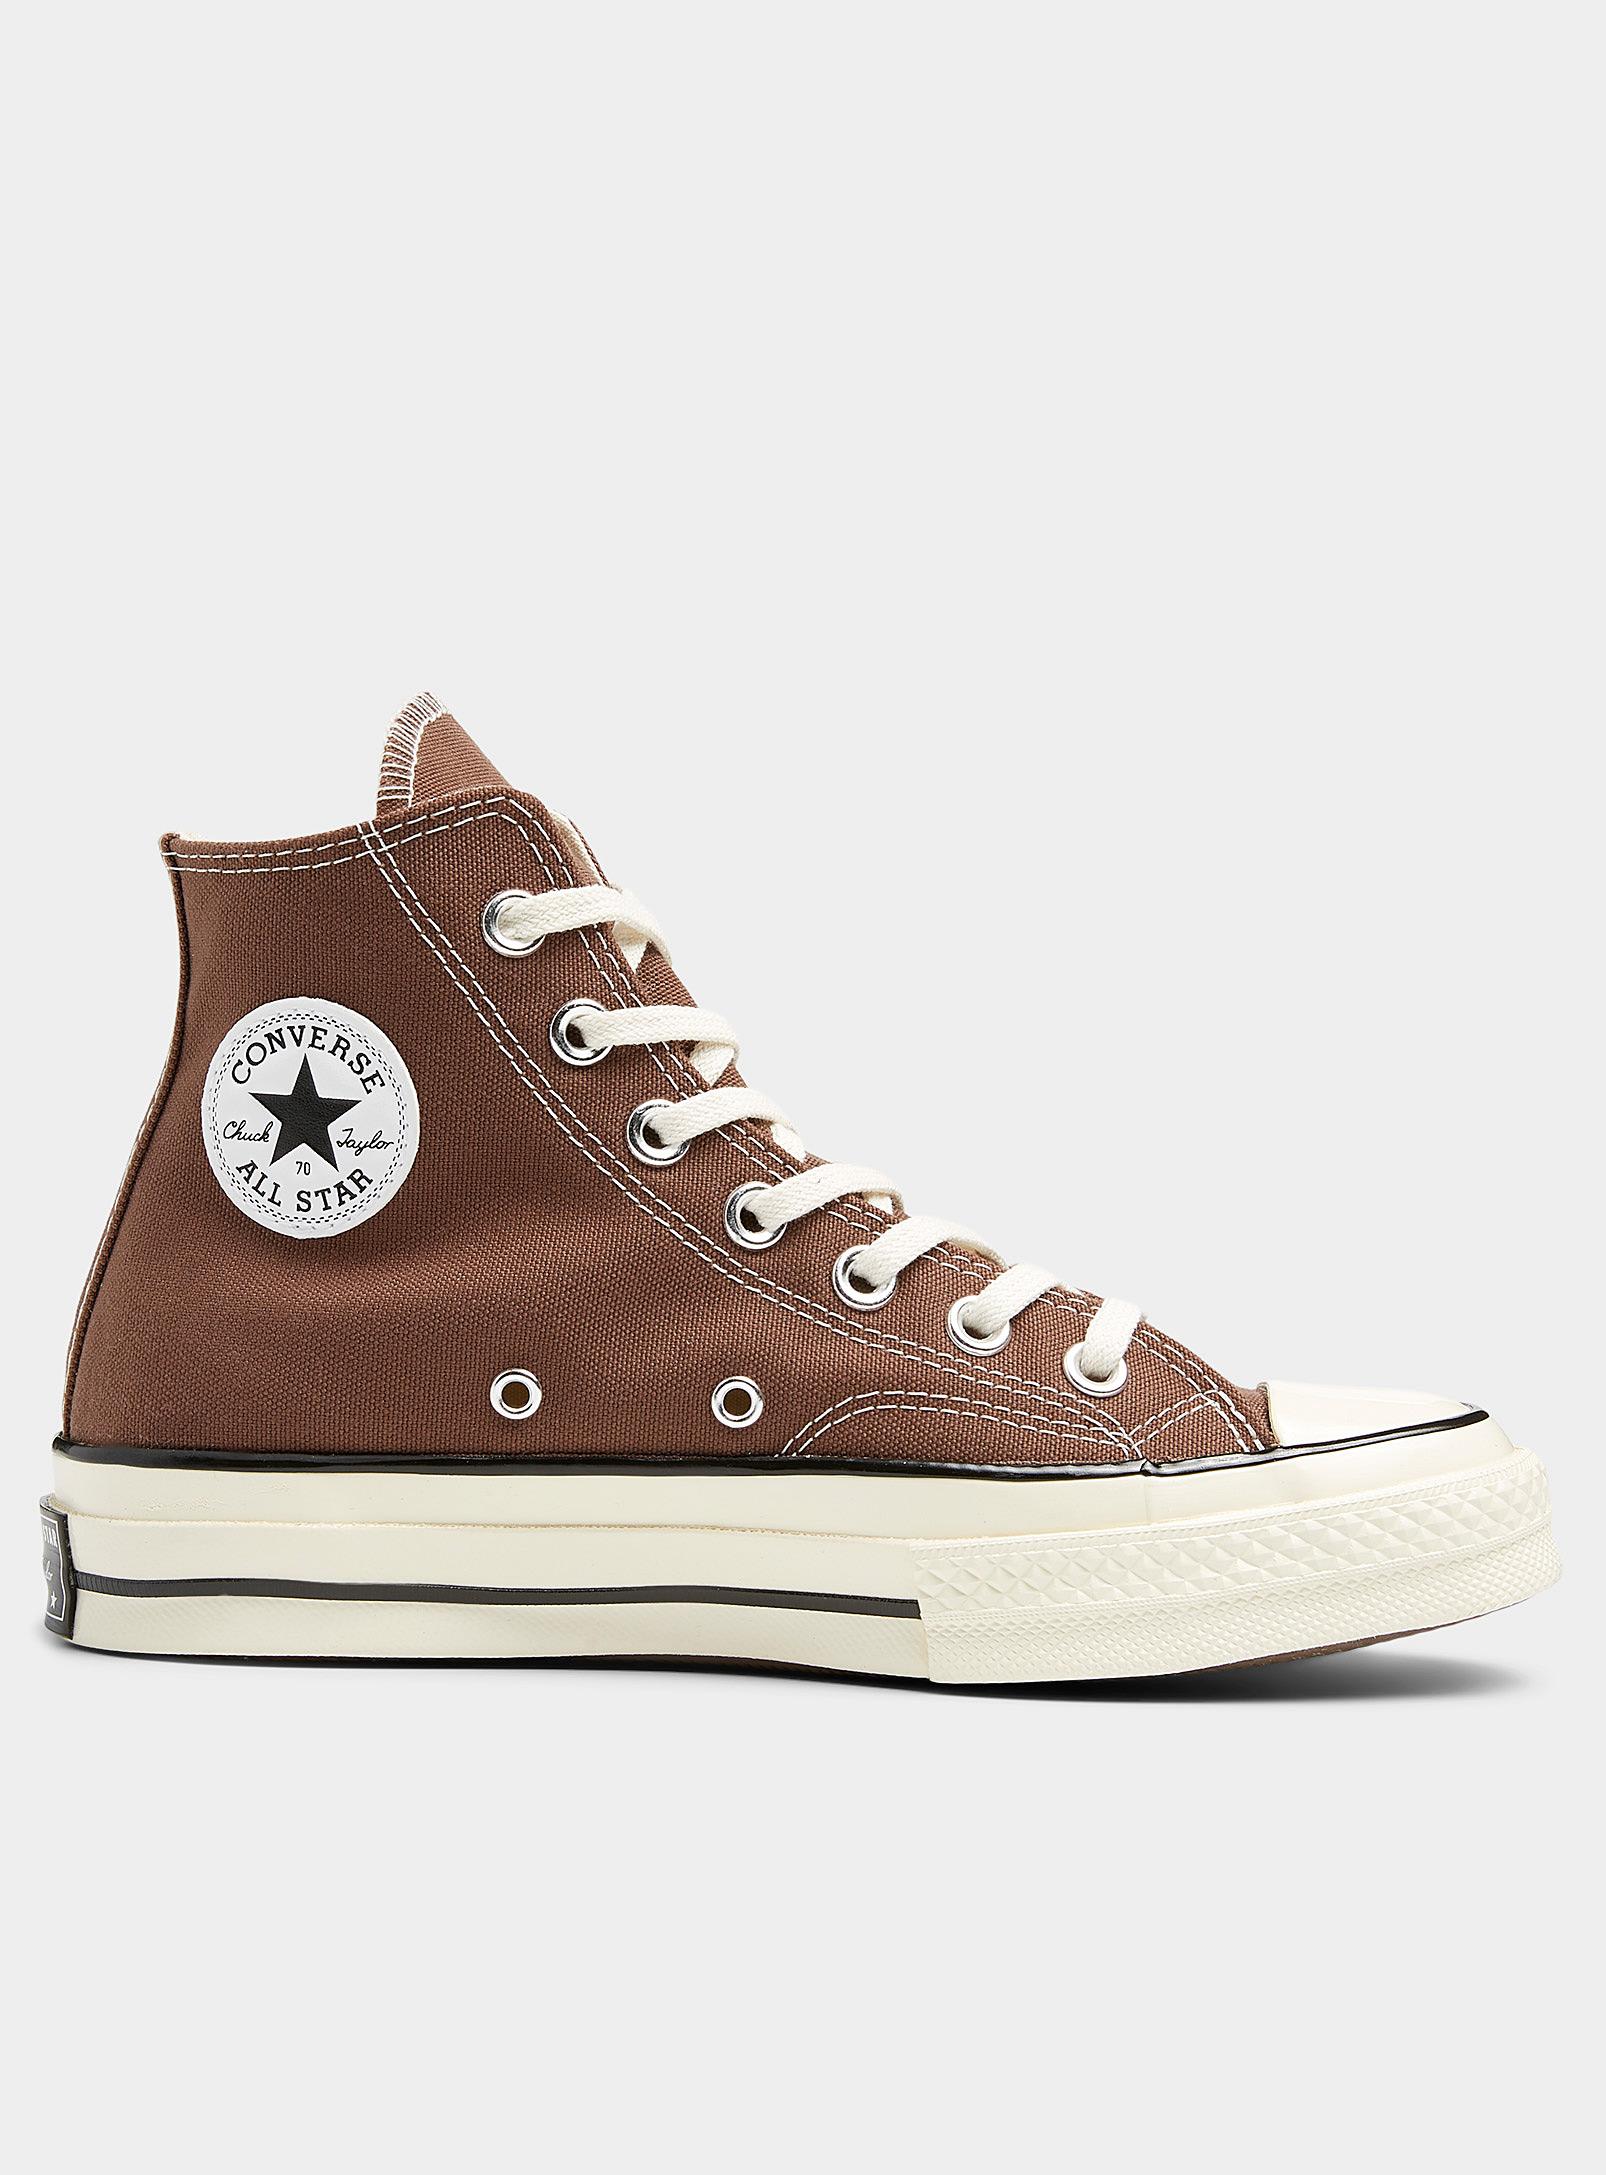 Converse Squirrel Brown Chuck 70 High Top Sneakers Women | Lyst